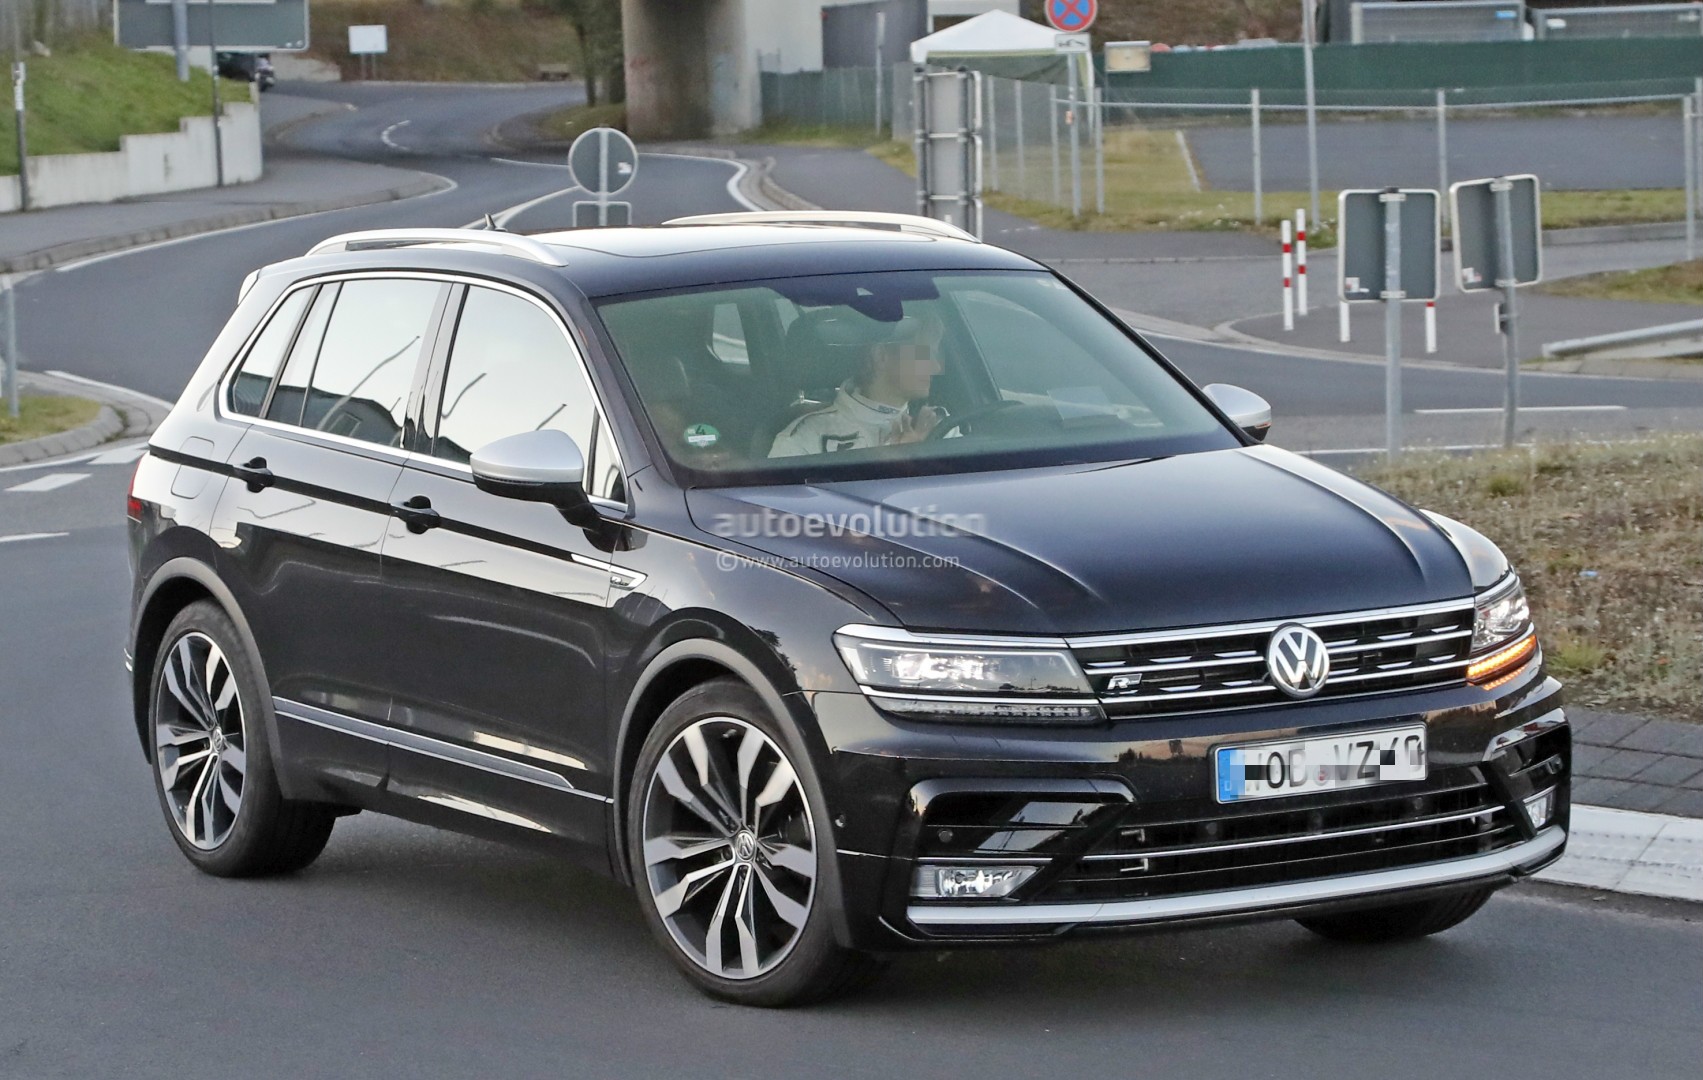 2018 Volkswagen Tiguan R Spotted at Nurburgring, Not Trying to Hide Its